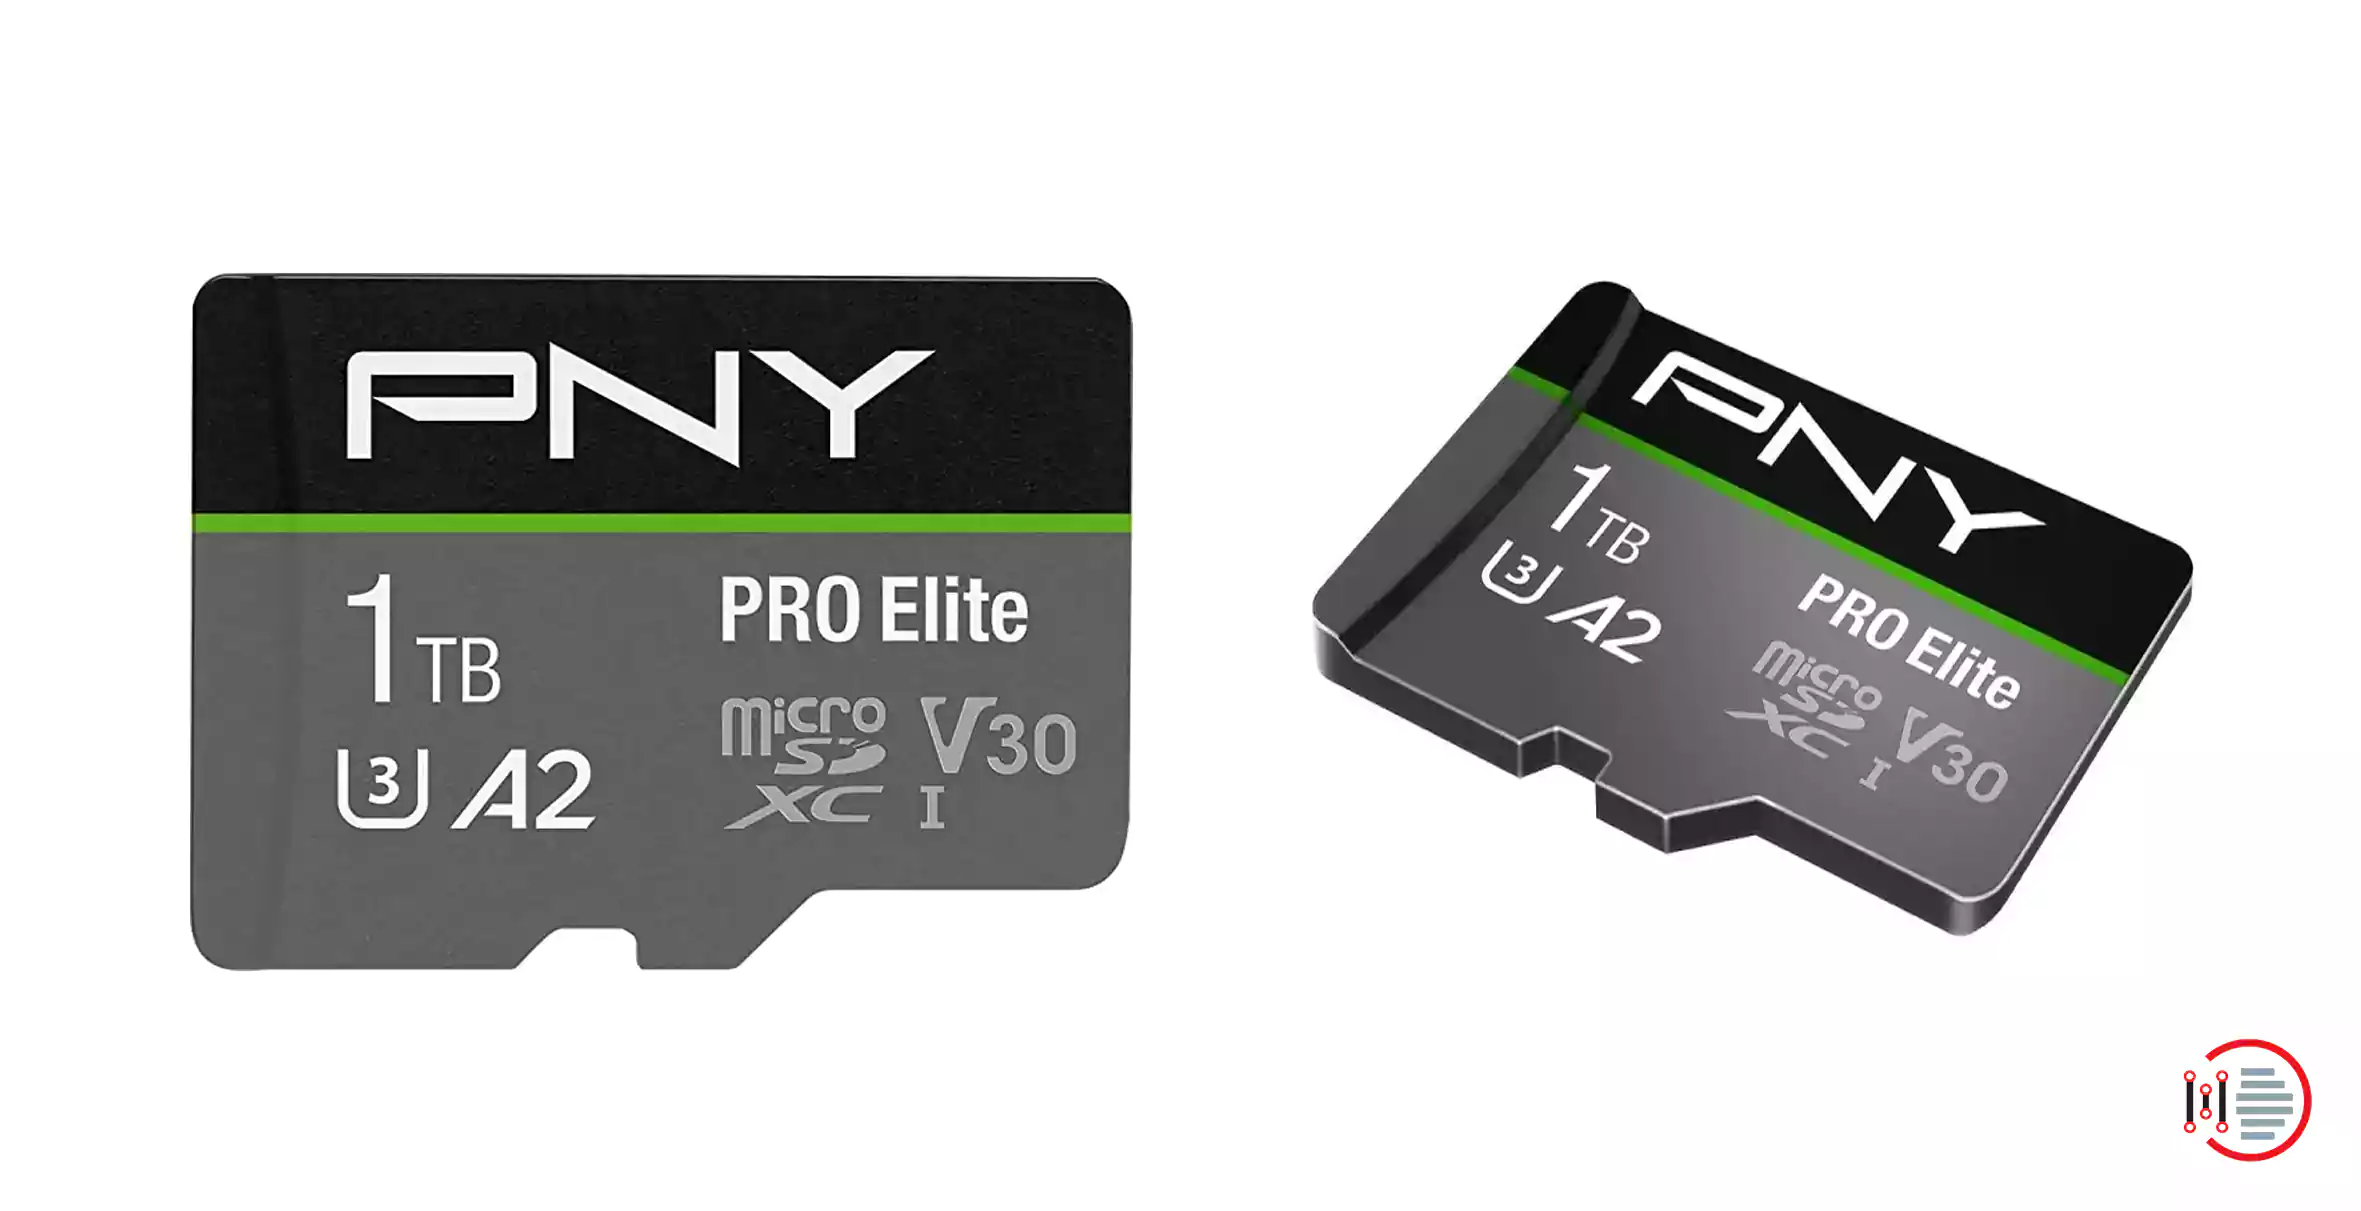 Which is the largest capacity micro SD card- PNY 1TB Pro Elite